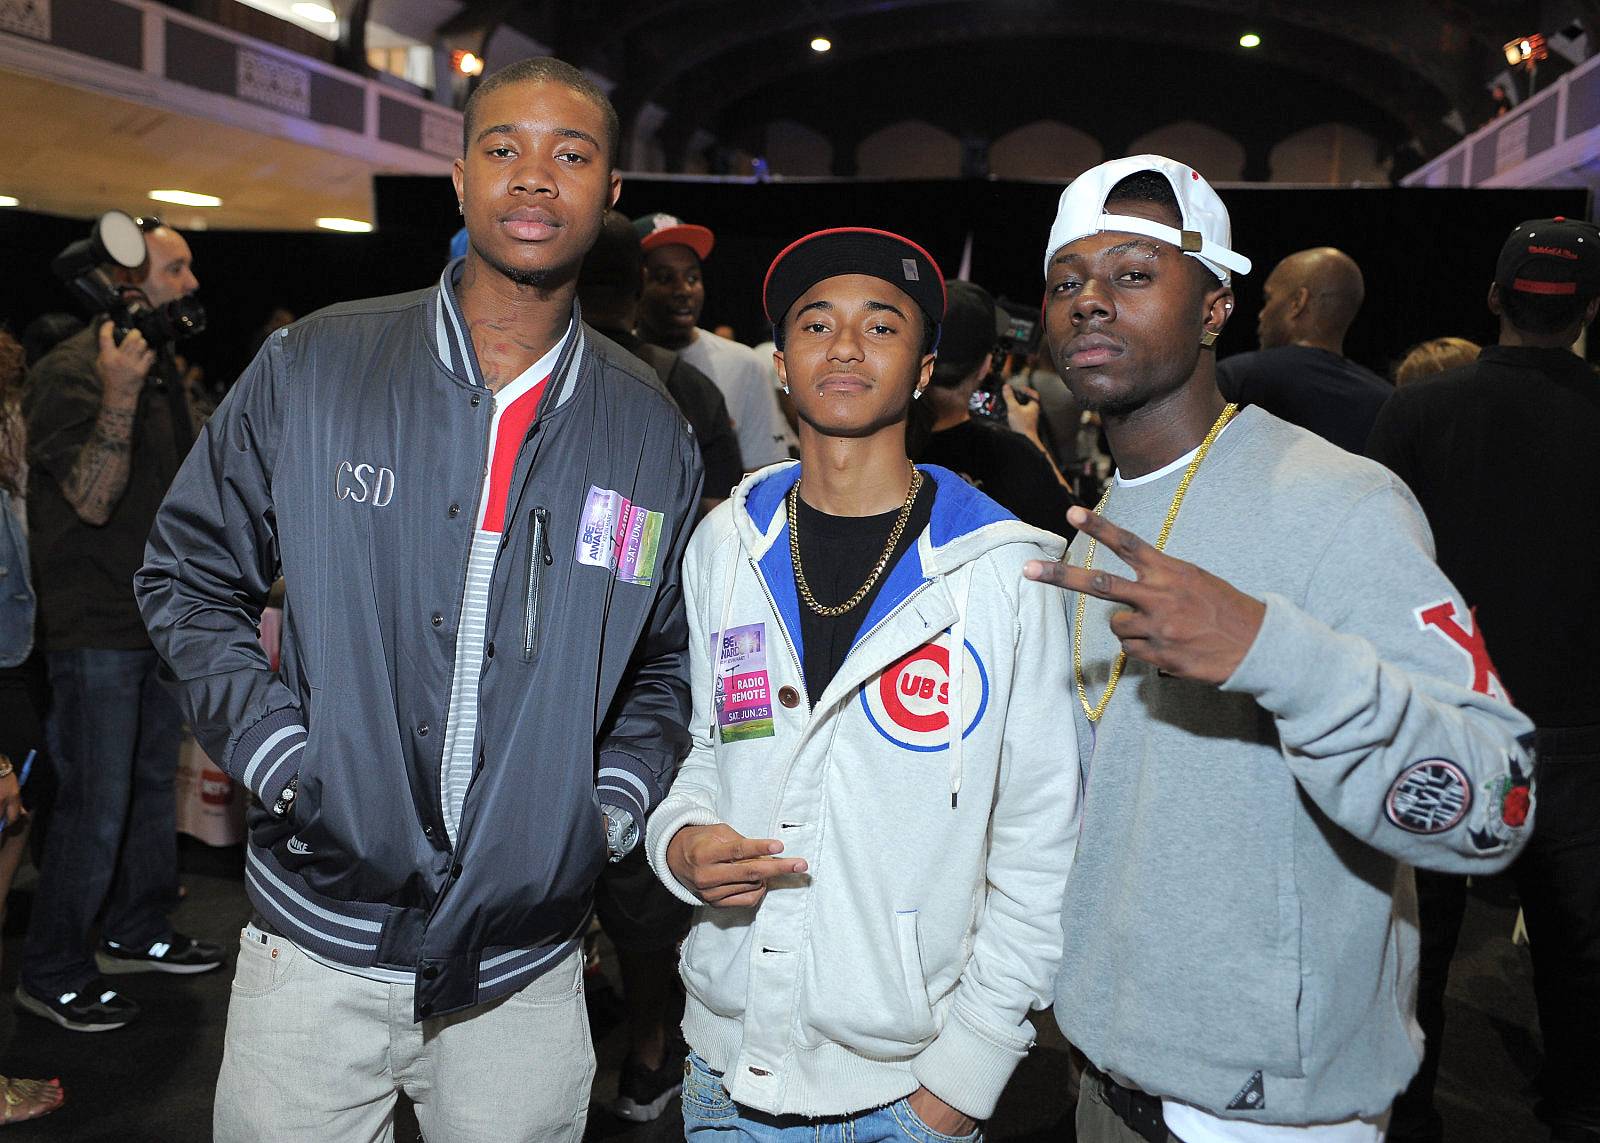 Cali Swag District - Best Group nominees Cali Swag District are the hometown favorites as they try to bag their first BET award.2011 BET Awards&nbsp;Radio Remote Room at The Shrine Auditorium, June 25, 2011, Los Angeles.&nbsp;Photo: Adrian Sidney/PictureGroup